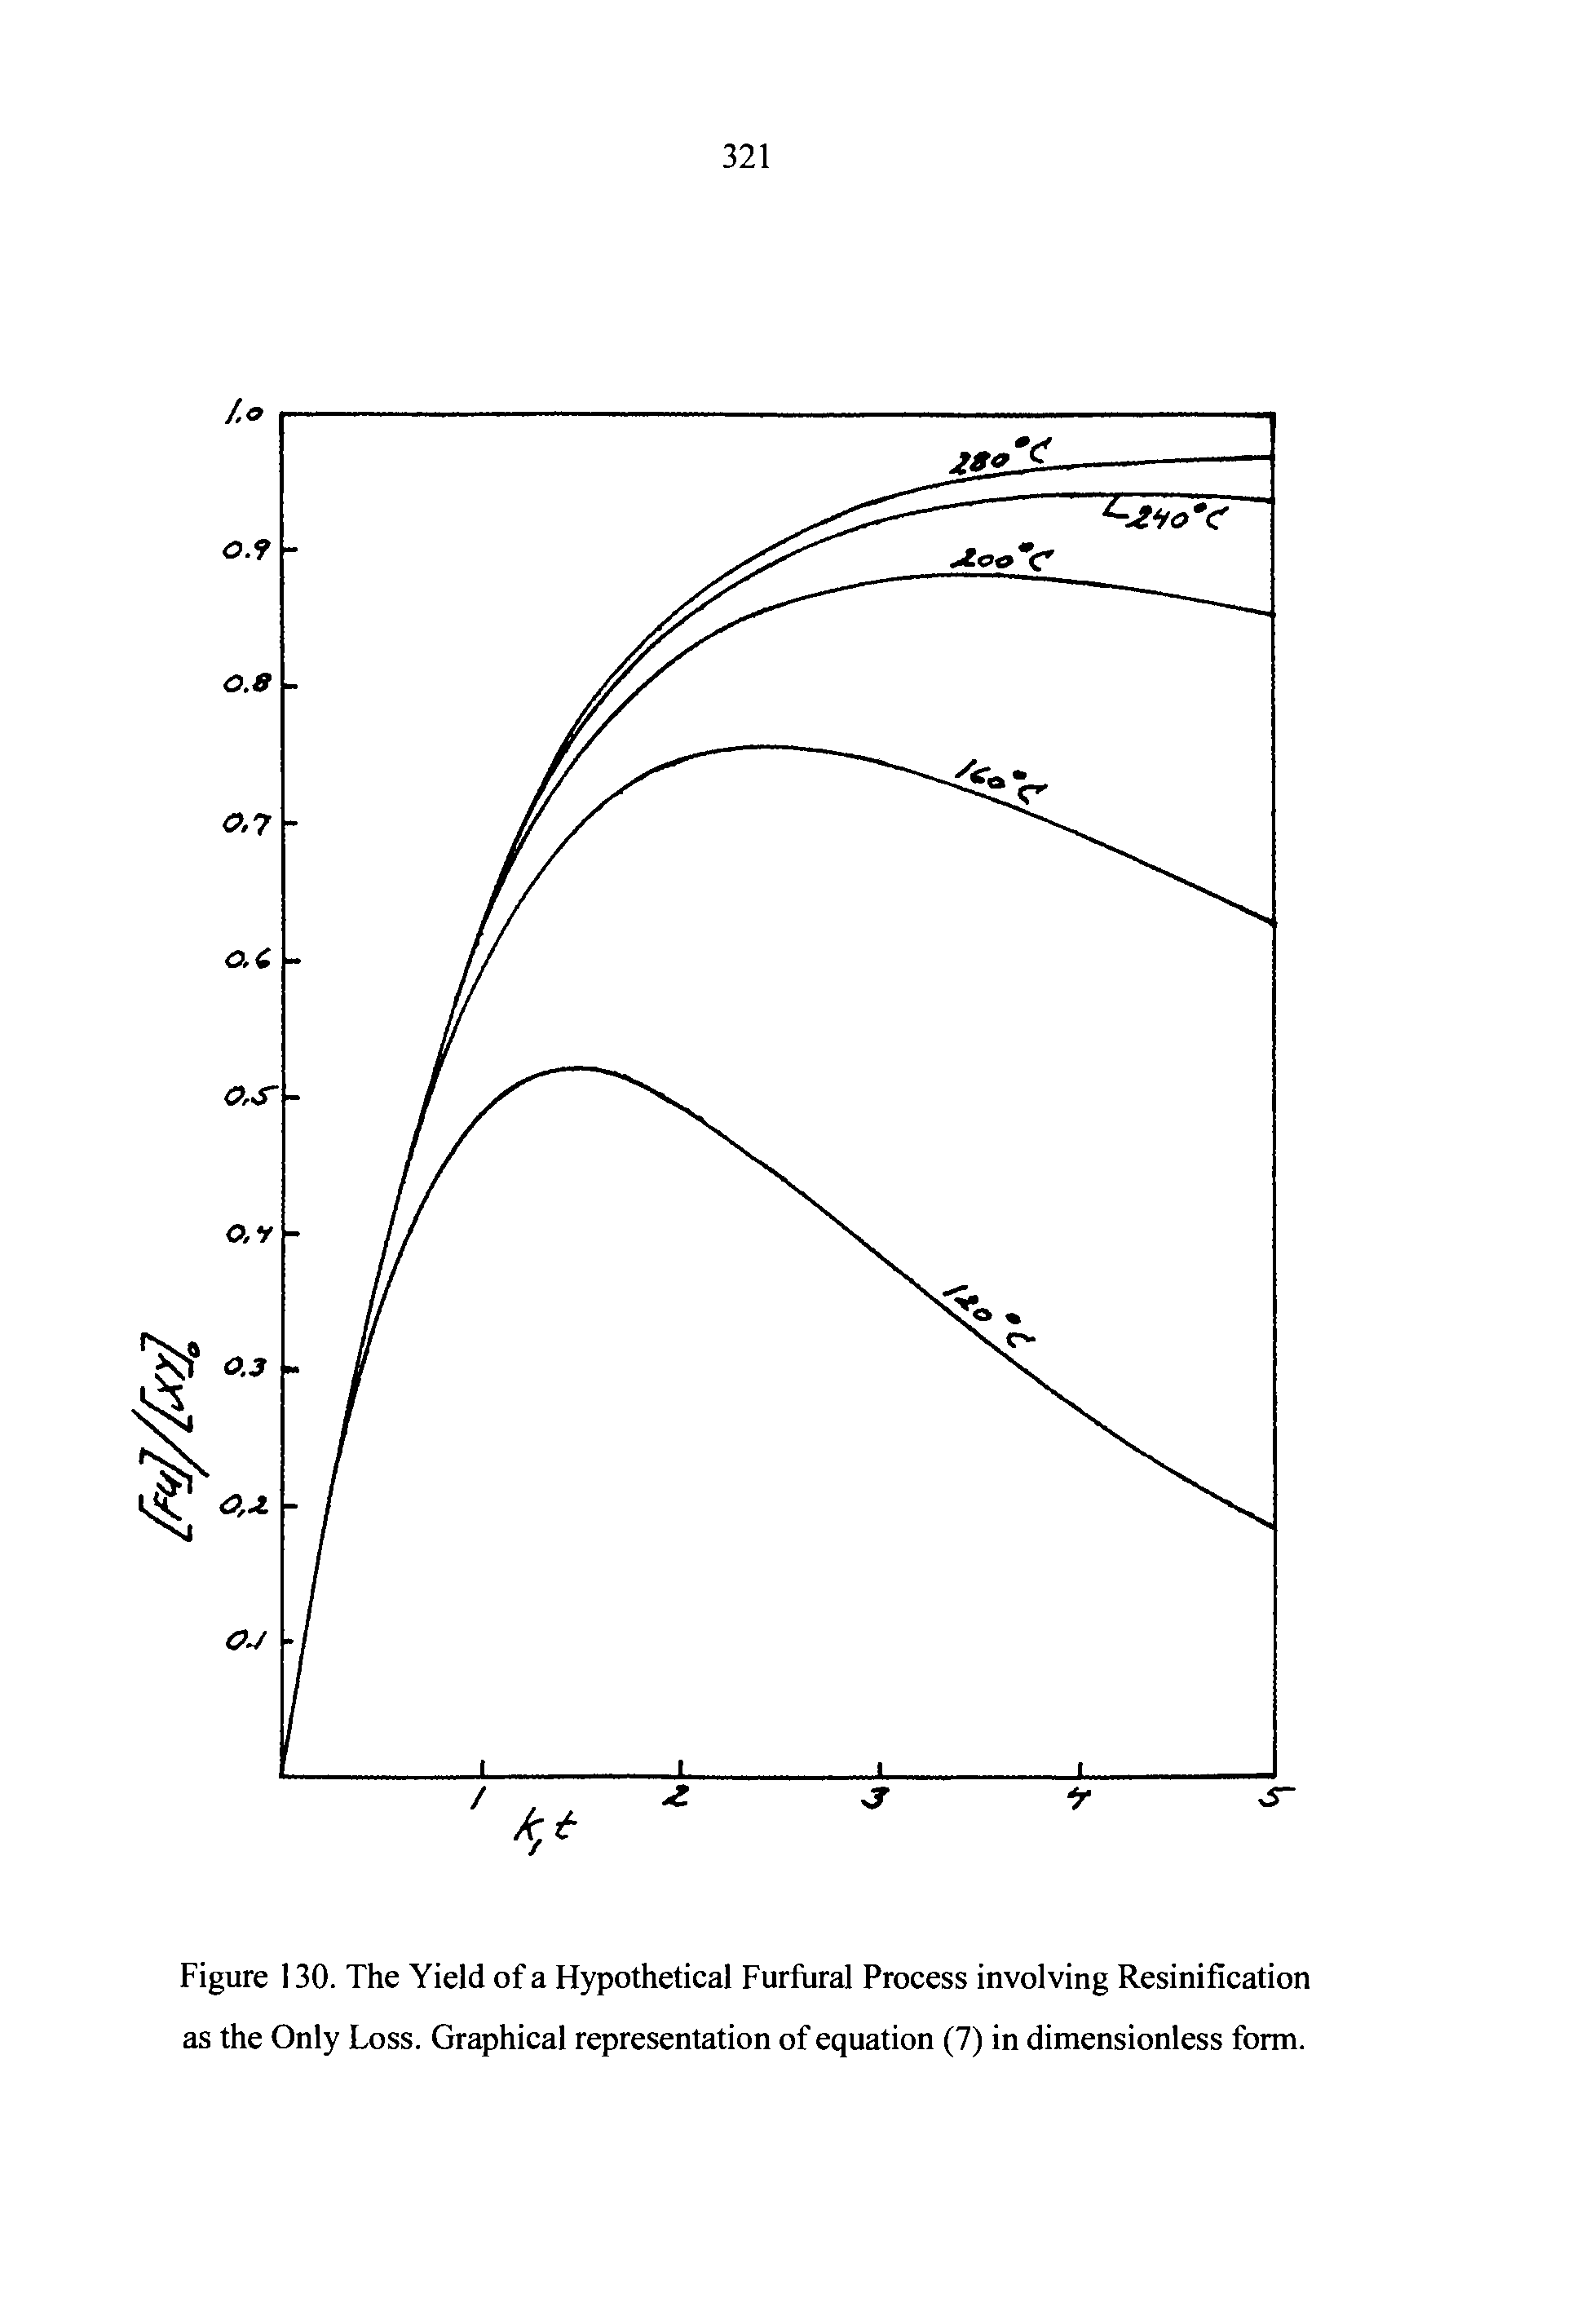 Figure 130. The Yield of a Hypothetical Furfural Process involving Resinification as the Only Loss. Graphical representation of equation (7) in dimensionless form.